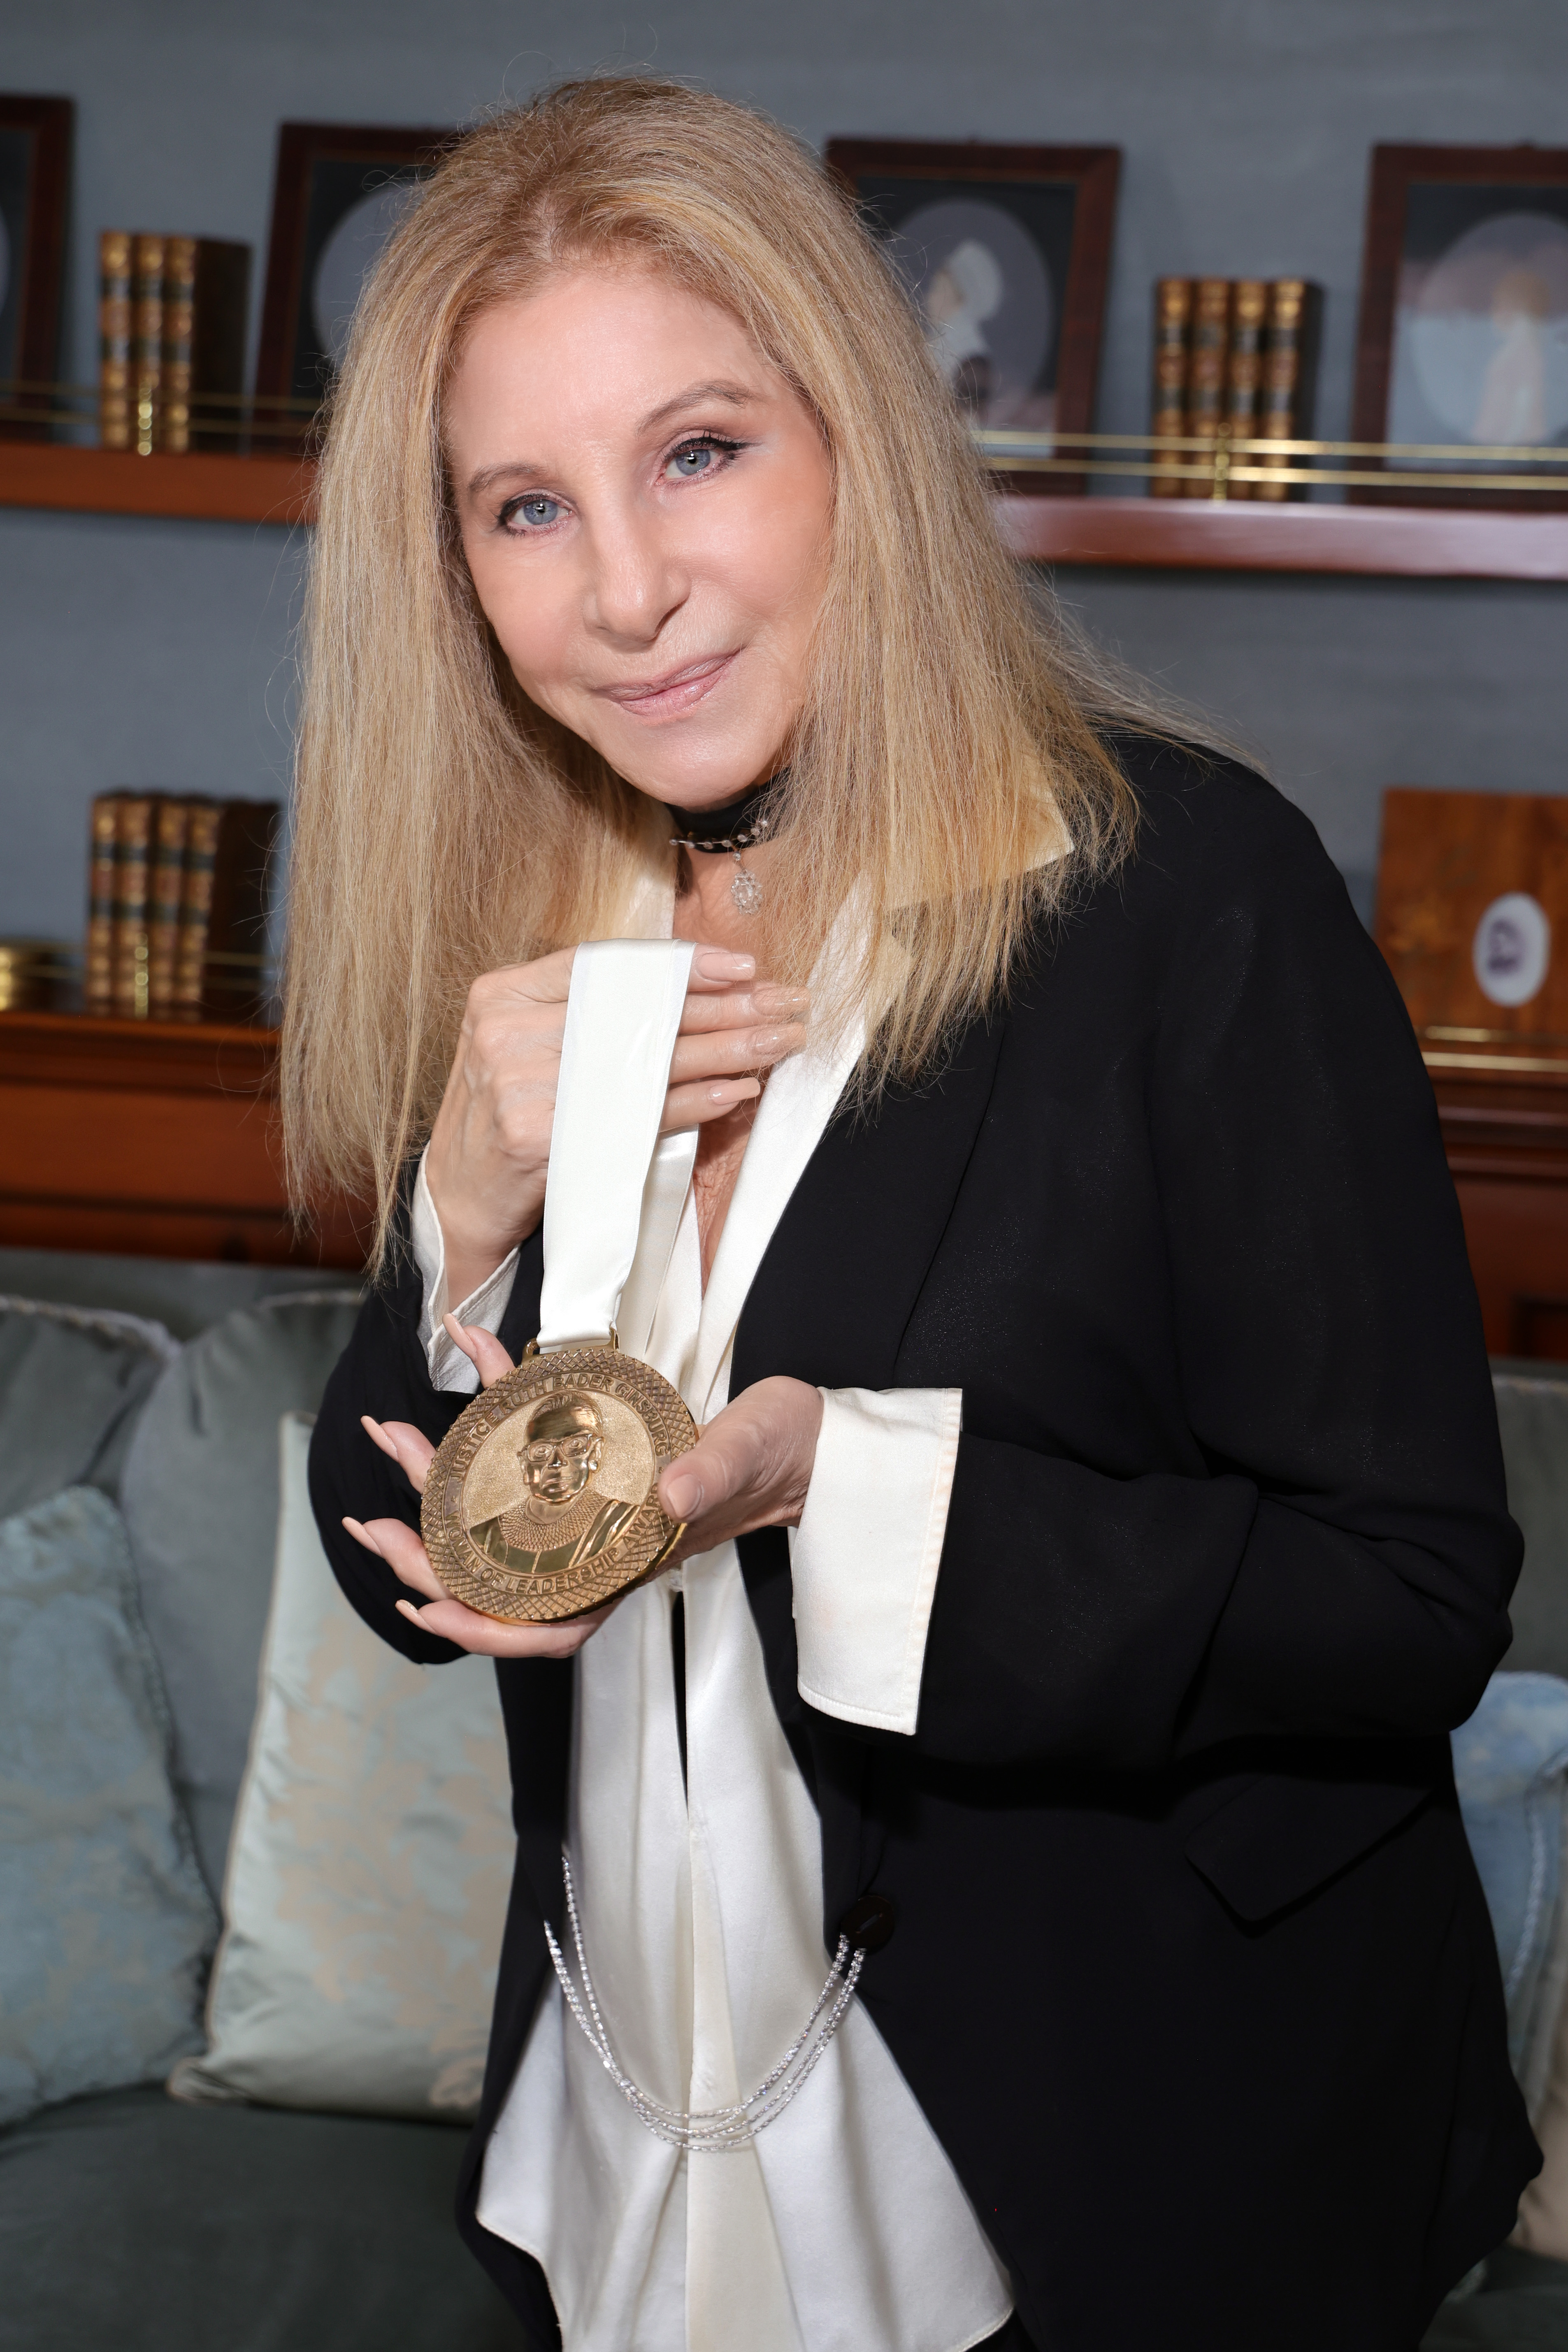 Barbra Streisand receives The Justice Ruth Bader Ginsburg Woman of Leadership Award in Malibu, California, on July 1, 2023. | Source: Getty Images